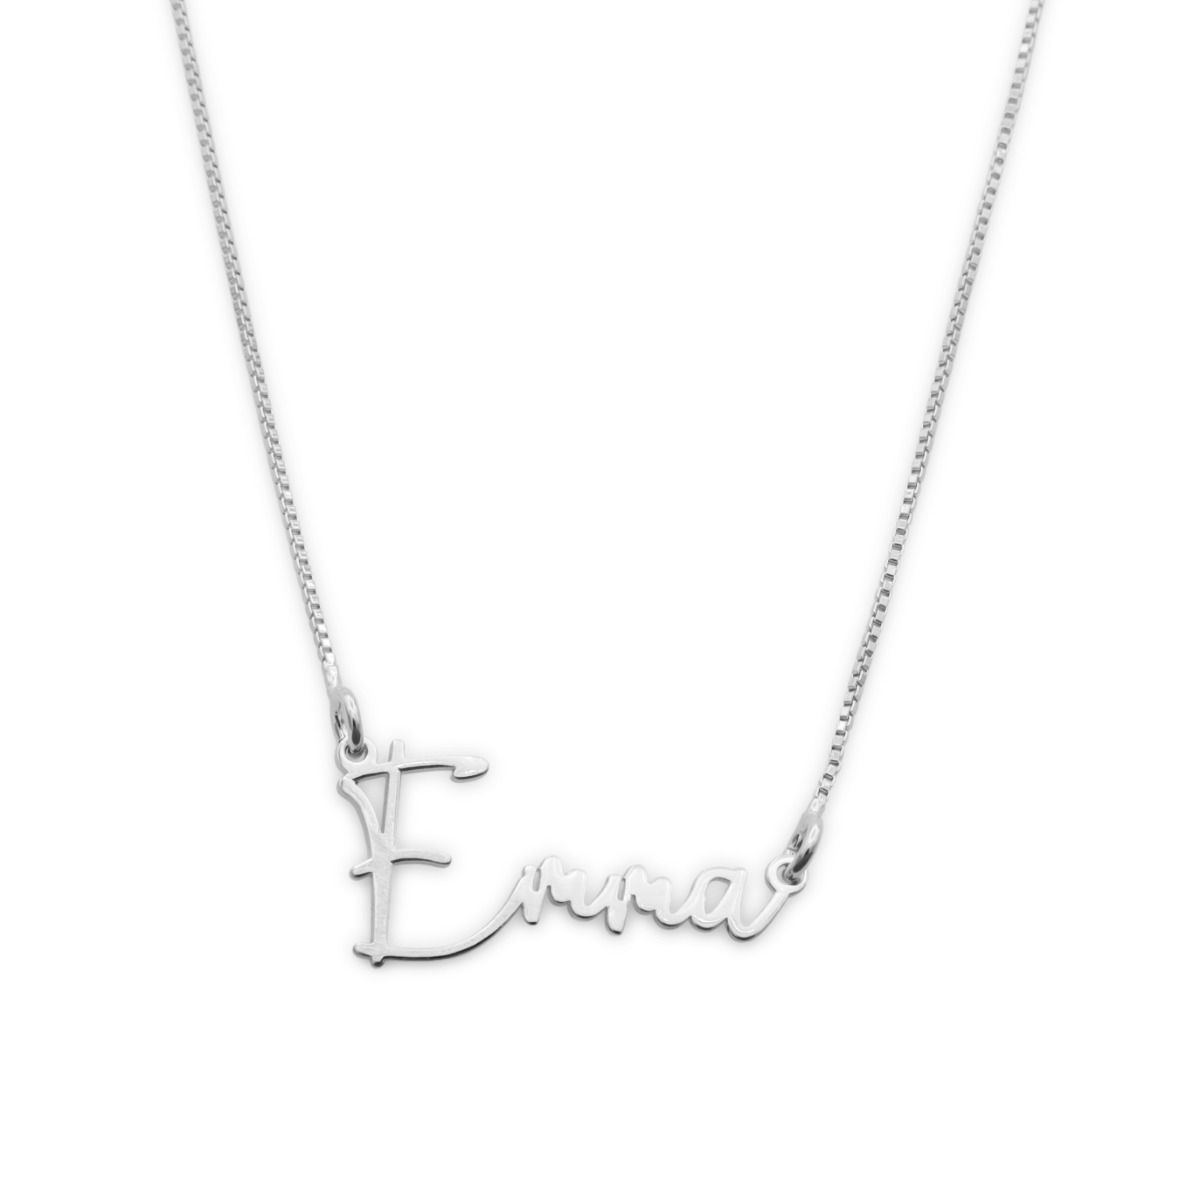 Signature Name Necklace - Silver